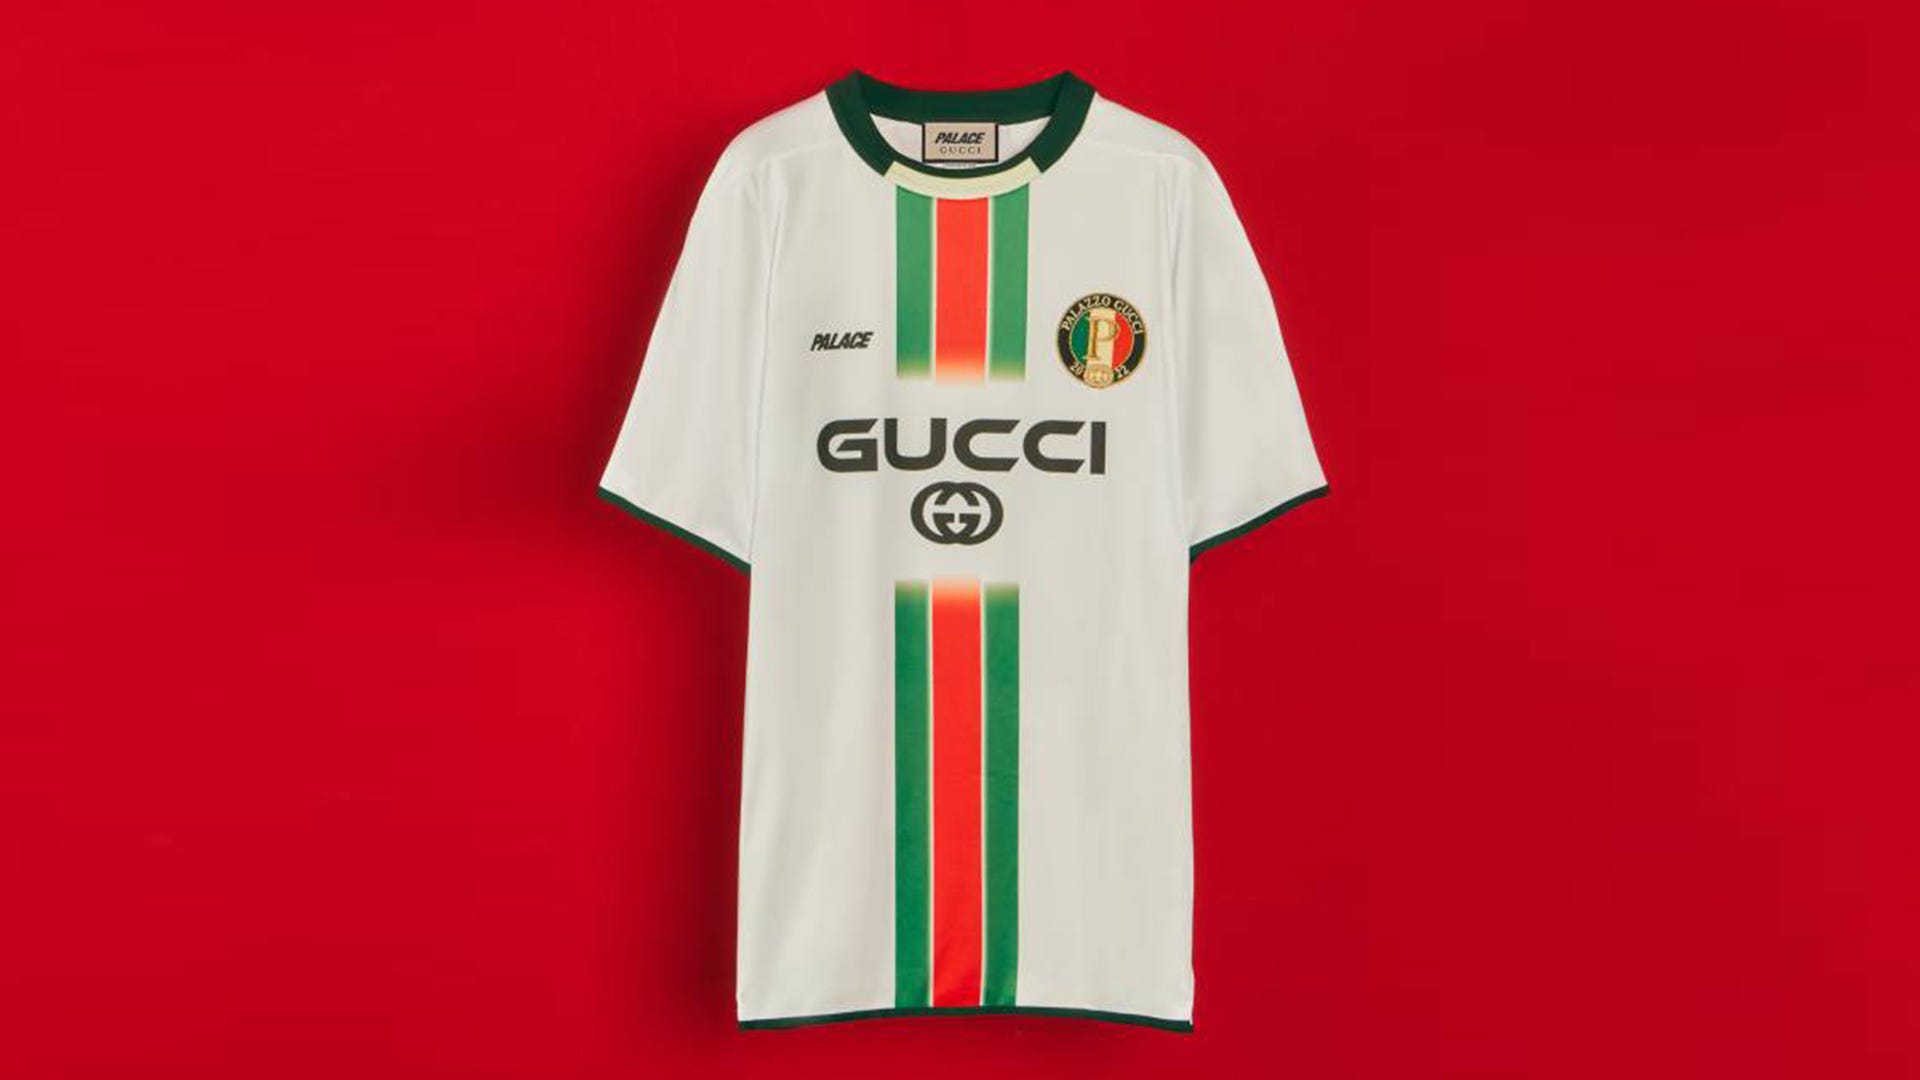 rapport Edition Trunk bibliotek Did Palace and Gucci just drop this year's best football shirts? | Goal.com